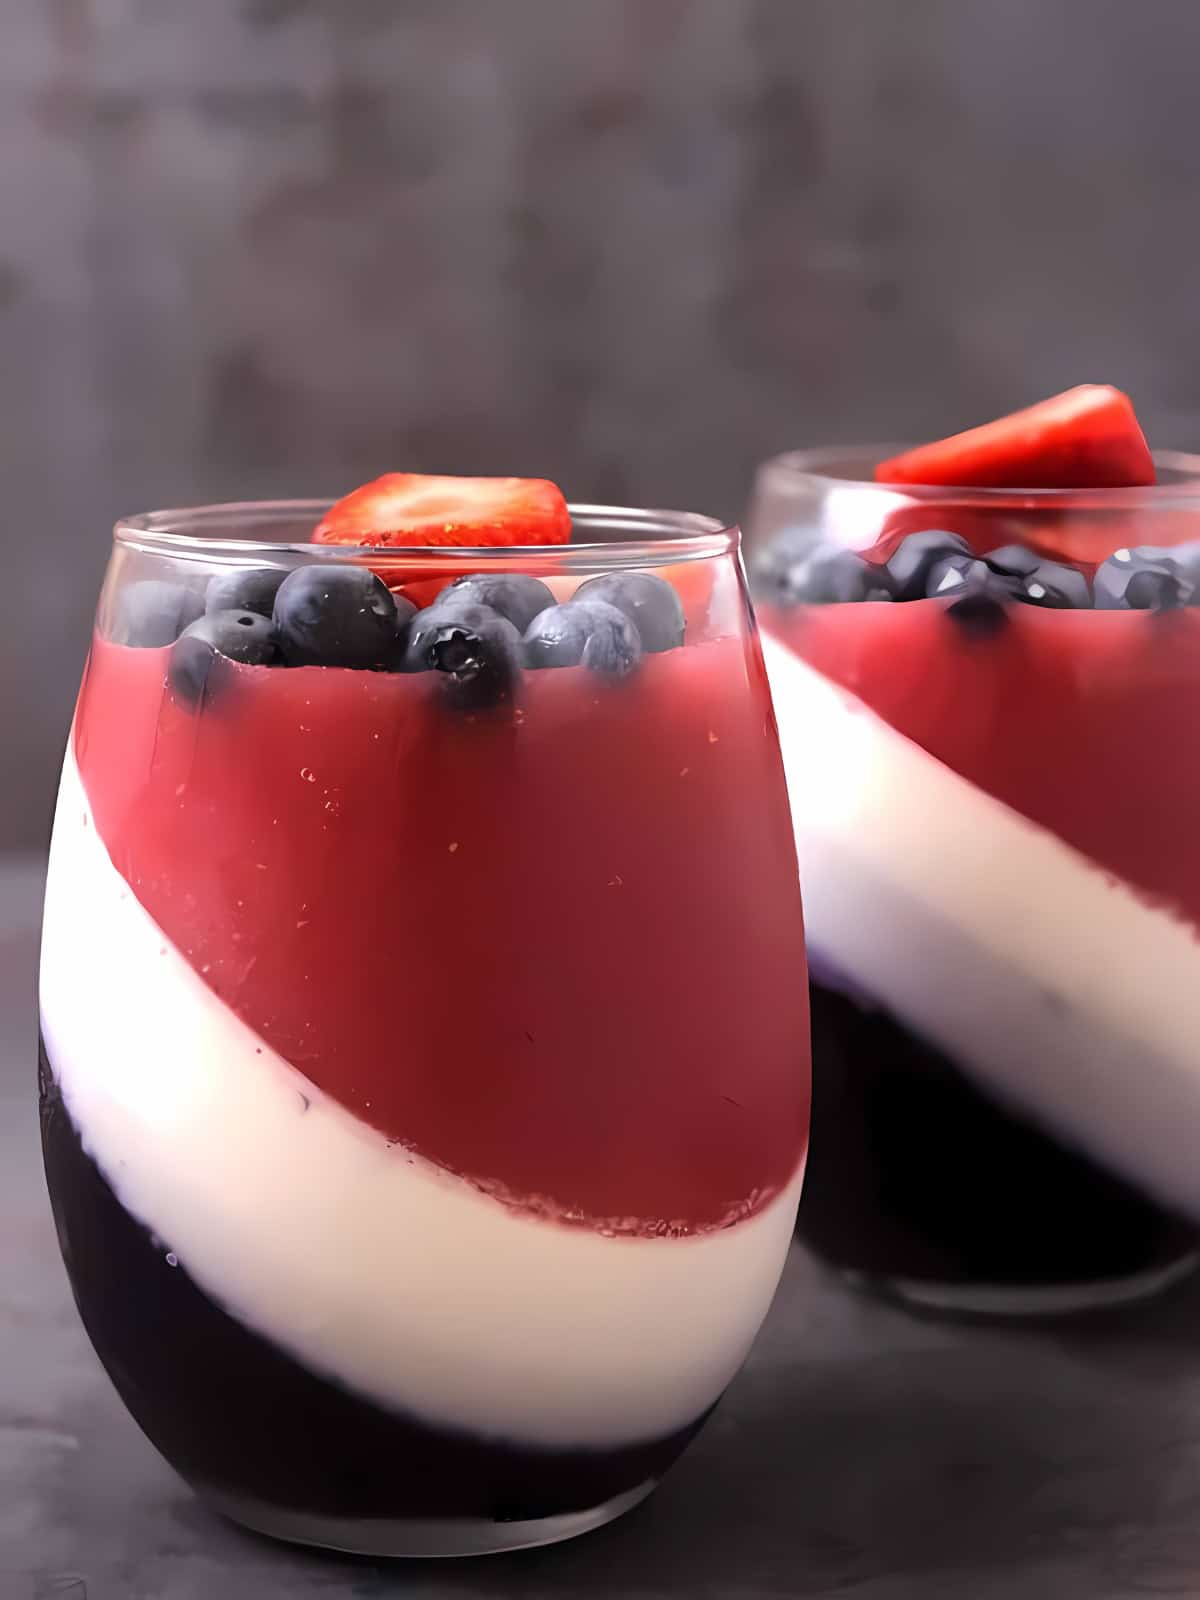 4th of July themed panna cotta with strawberries and blueberries.